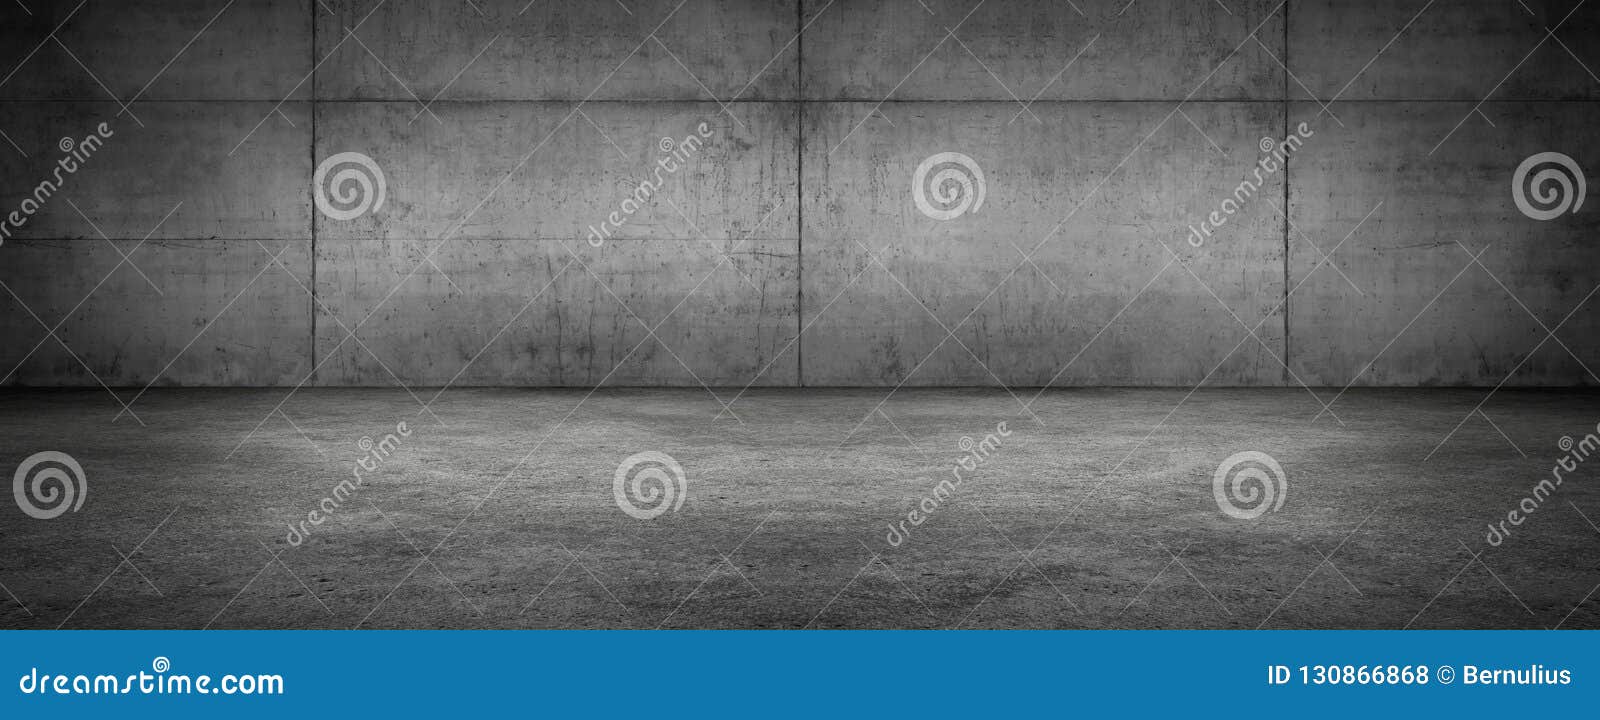 dark empty concrete wall room stage modern panoramic textured background